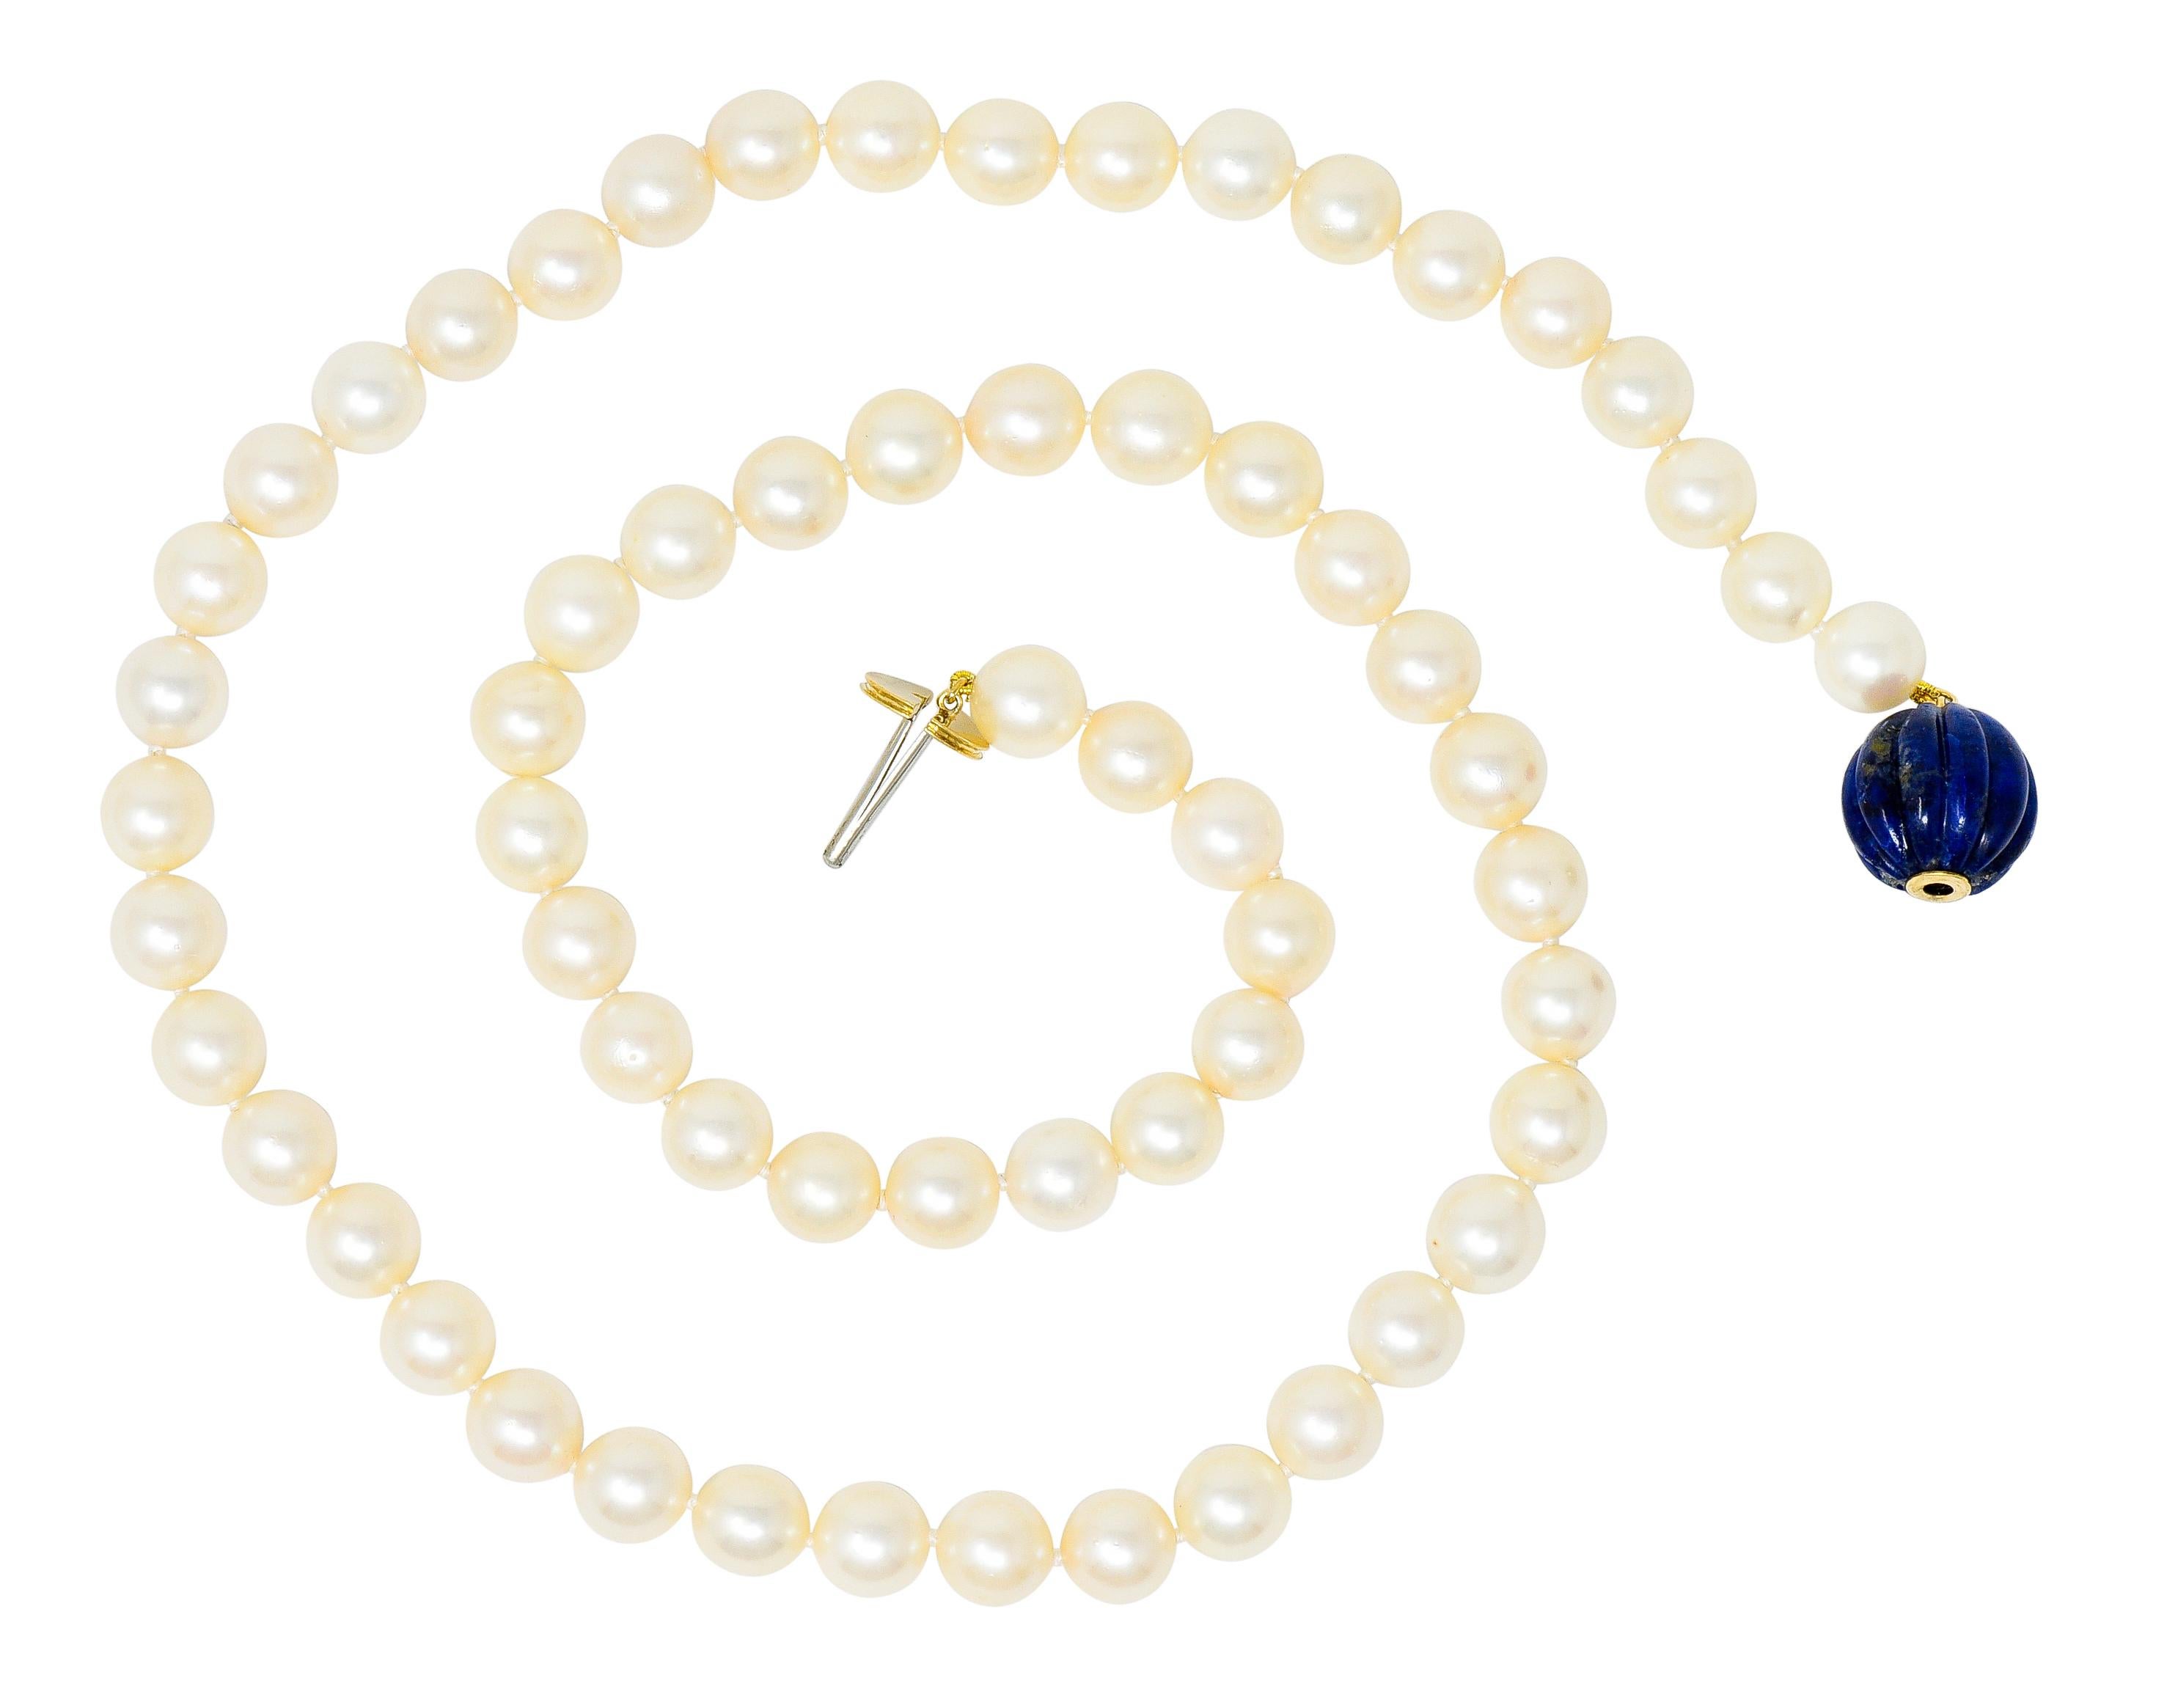 Hand knotted strand necklace comprised of round cultured pearls measuring from 8.5 to 8.8 mm

Incredibly well-matched cream body color with moderate rosè overtones and a very good luster

Terminating as a deeply fluted 14.8 mm lapis bead, opaque and